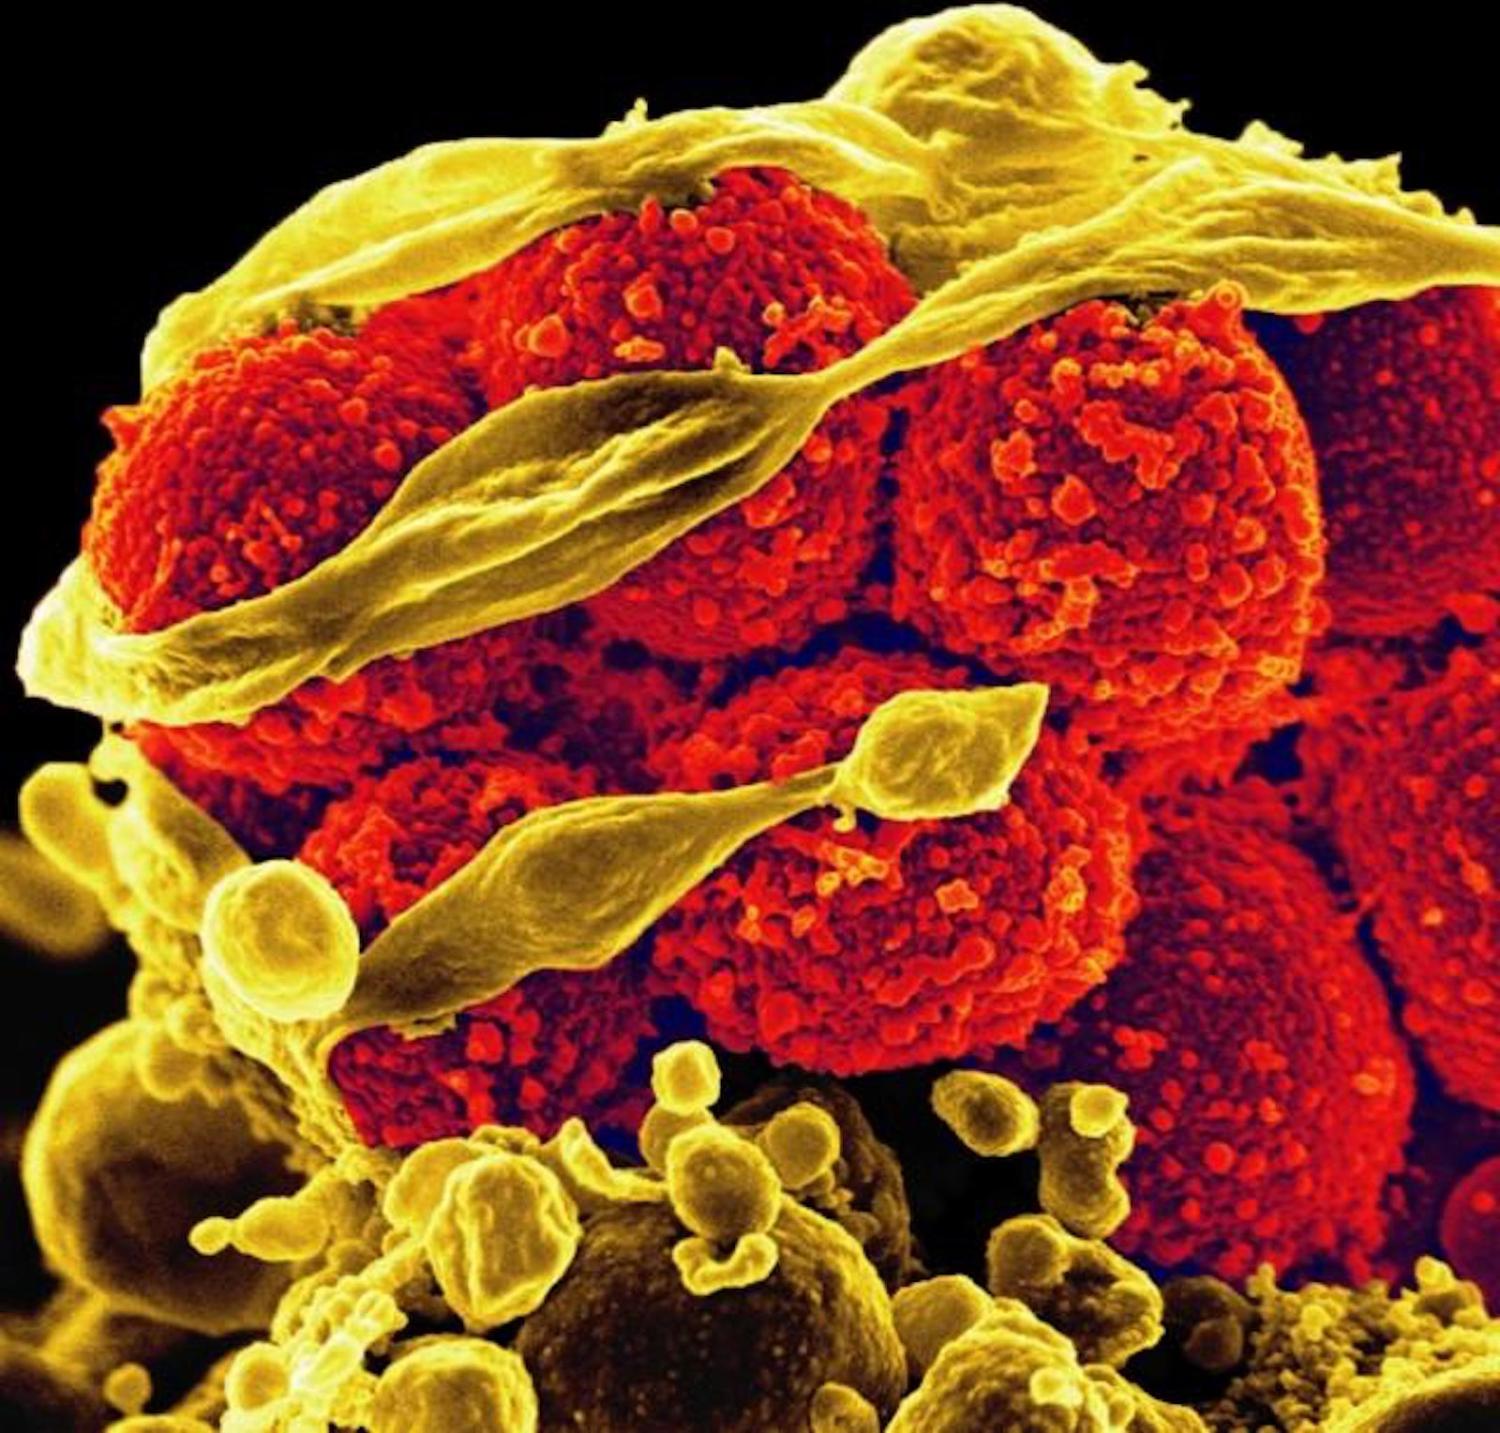 Staphylococcus aureus bacteria killing and escaping from a human white blood cell (Photo: NIAID/Flickr)